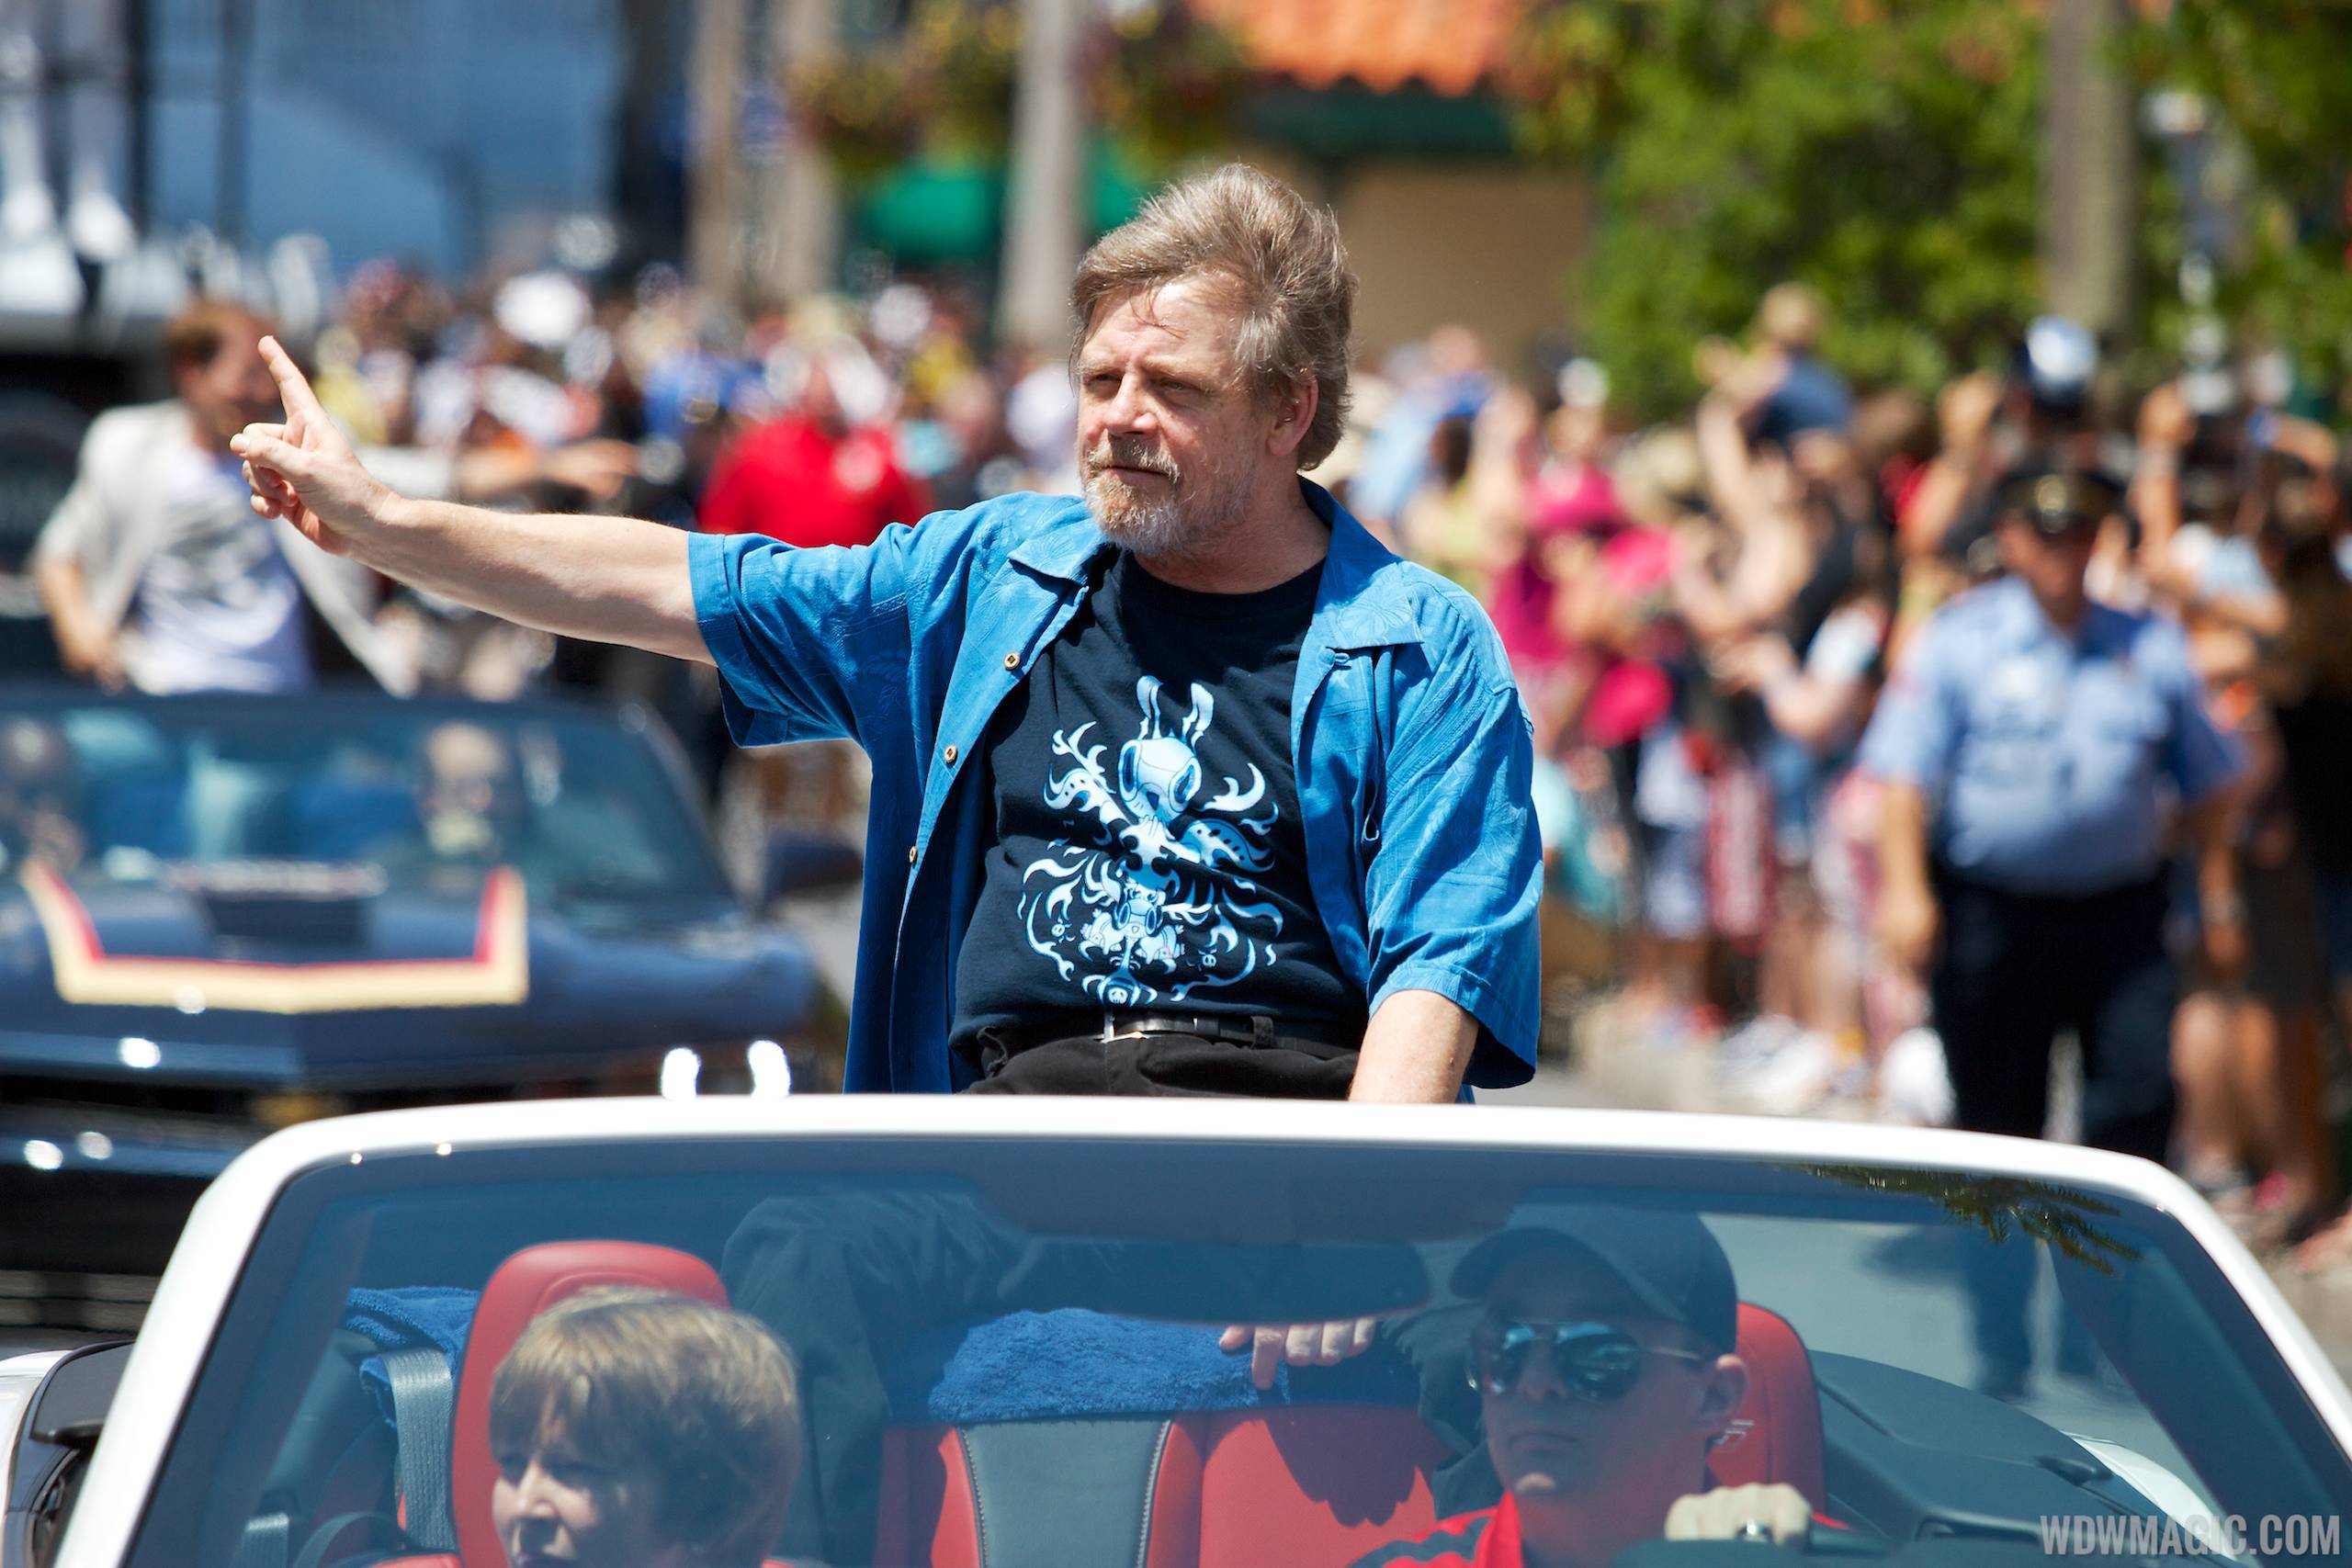 PHOTOS - Mark Hamill appears for the first time at Star Wars Weekends